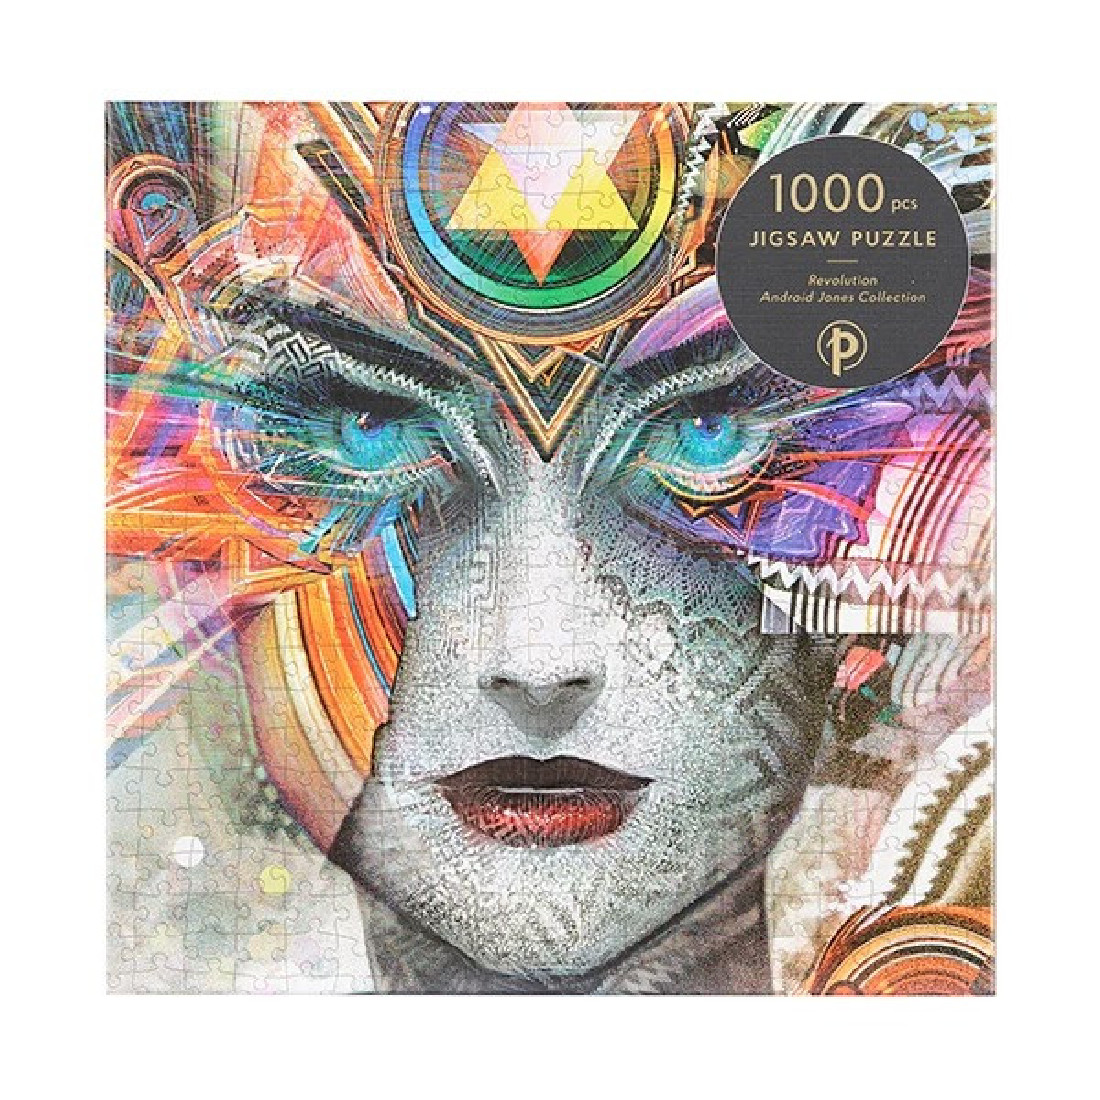 Jigsaw puzzle 1000pcs, Revolution, Android Jones collection Paperblanks